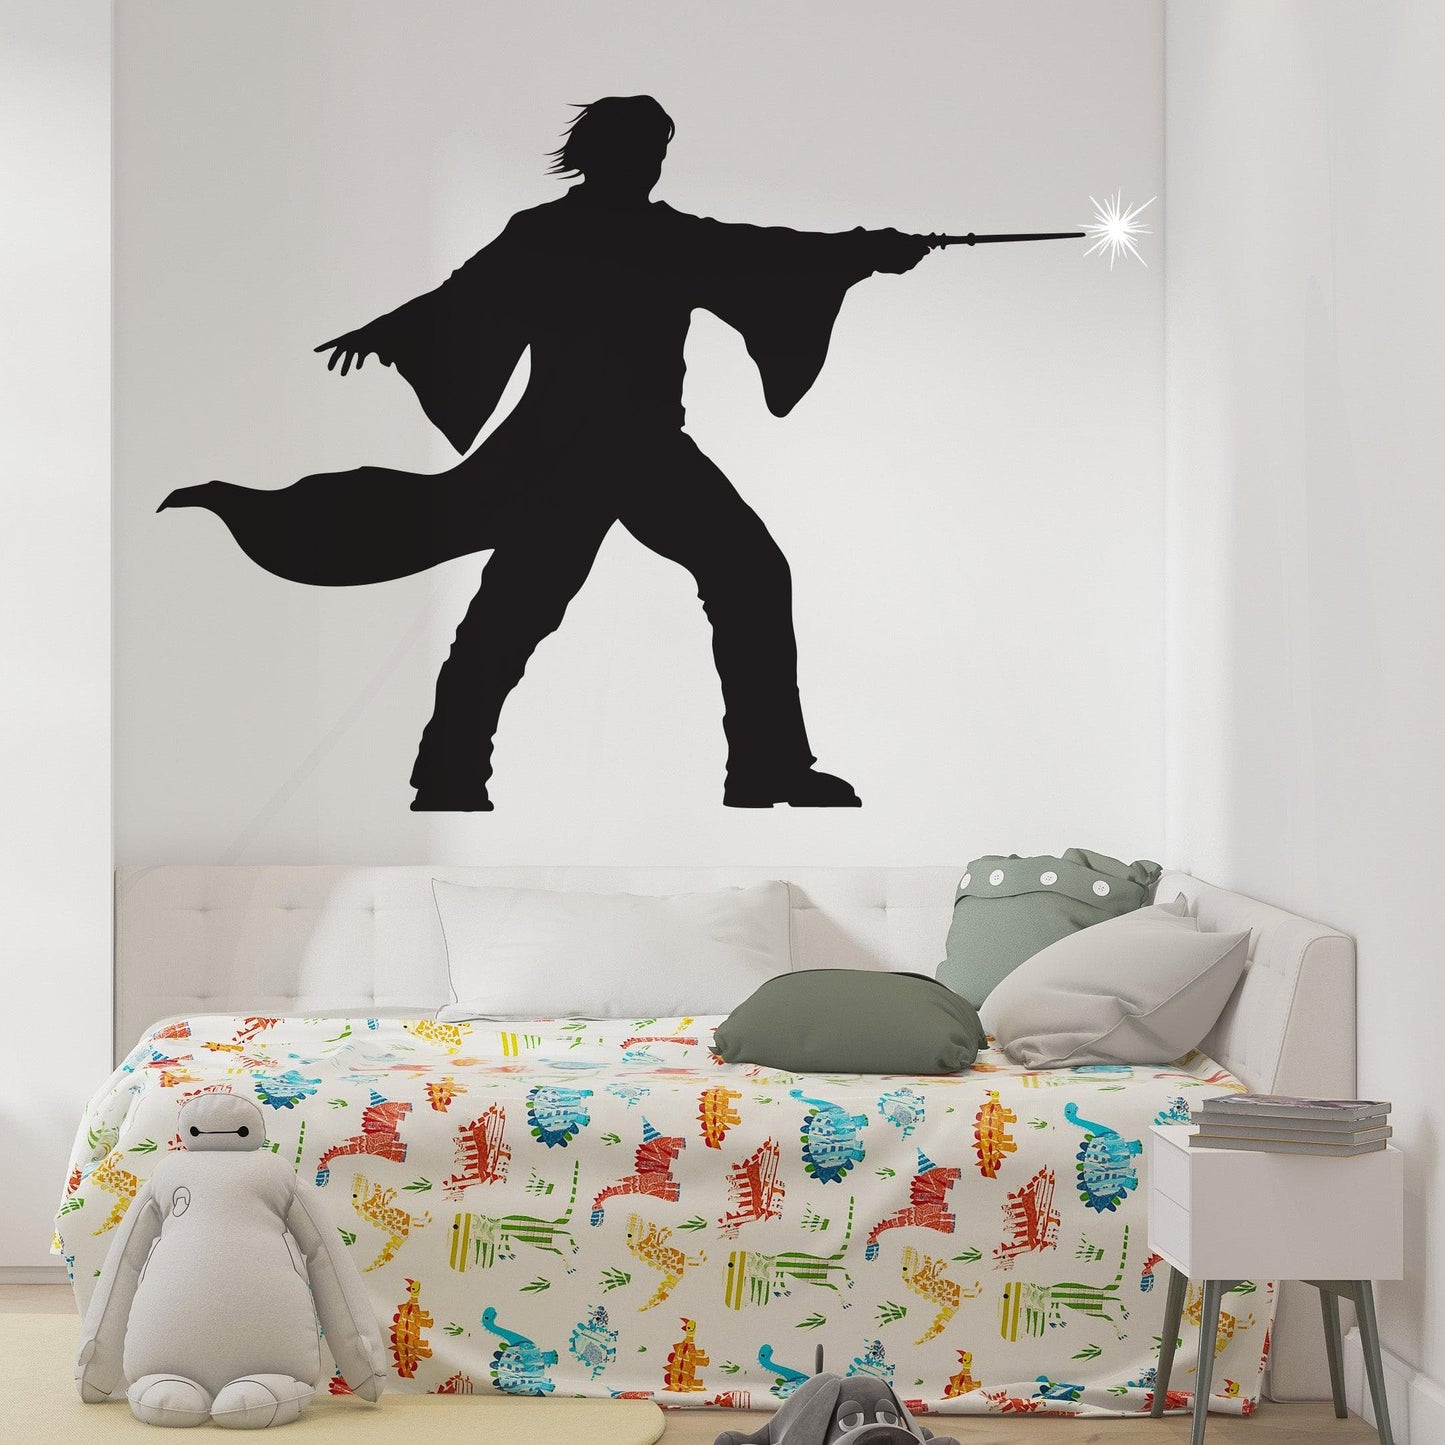 Boy Wizard Wall Decal. Wizardly World Wall Decal. #GFoster168